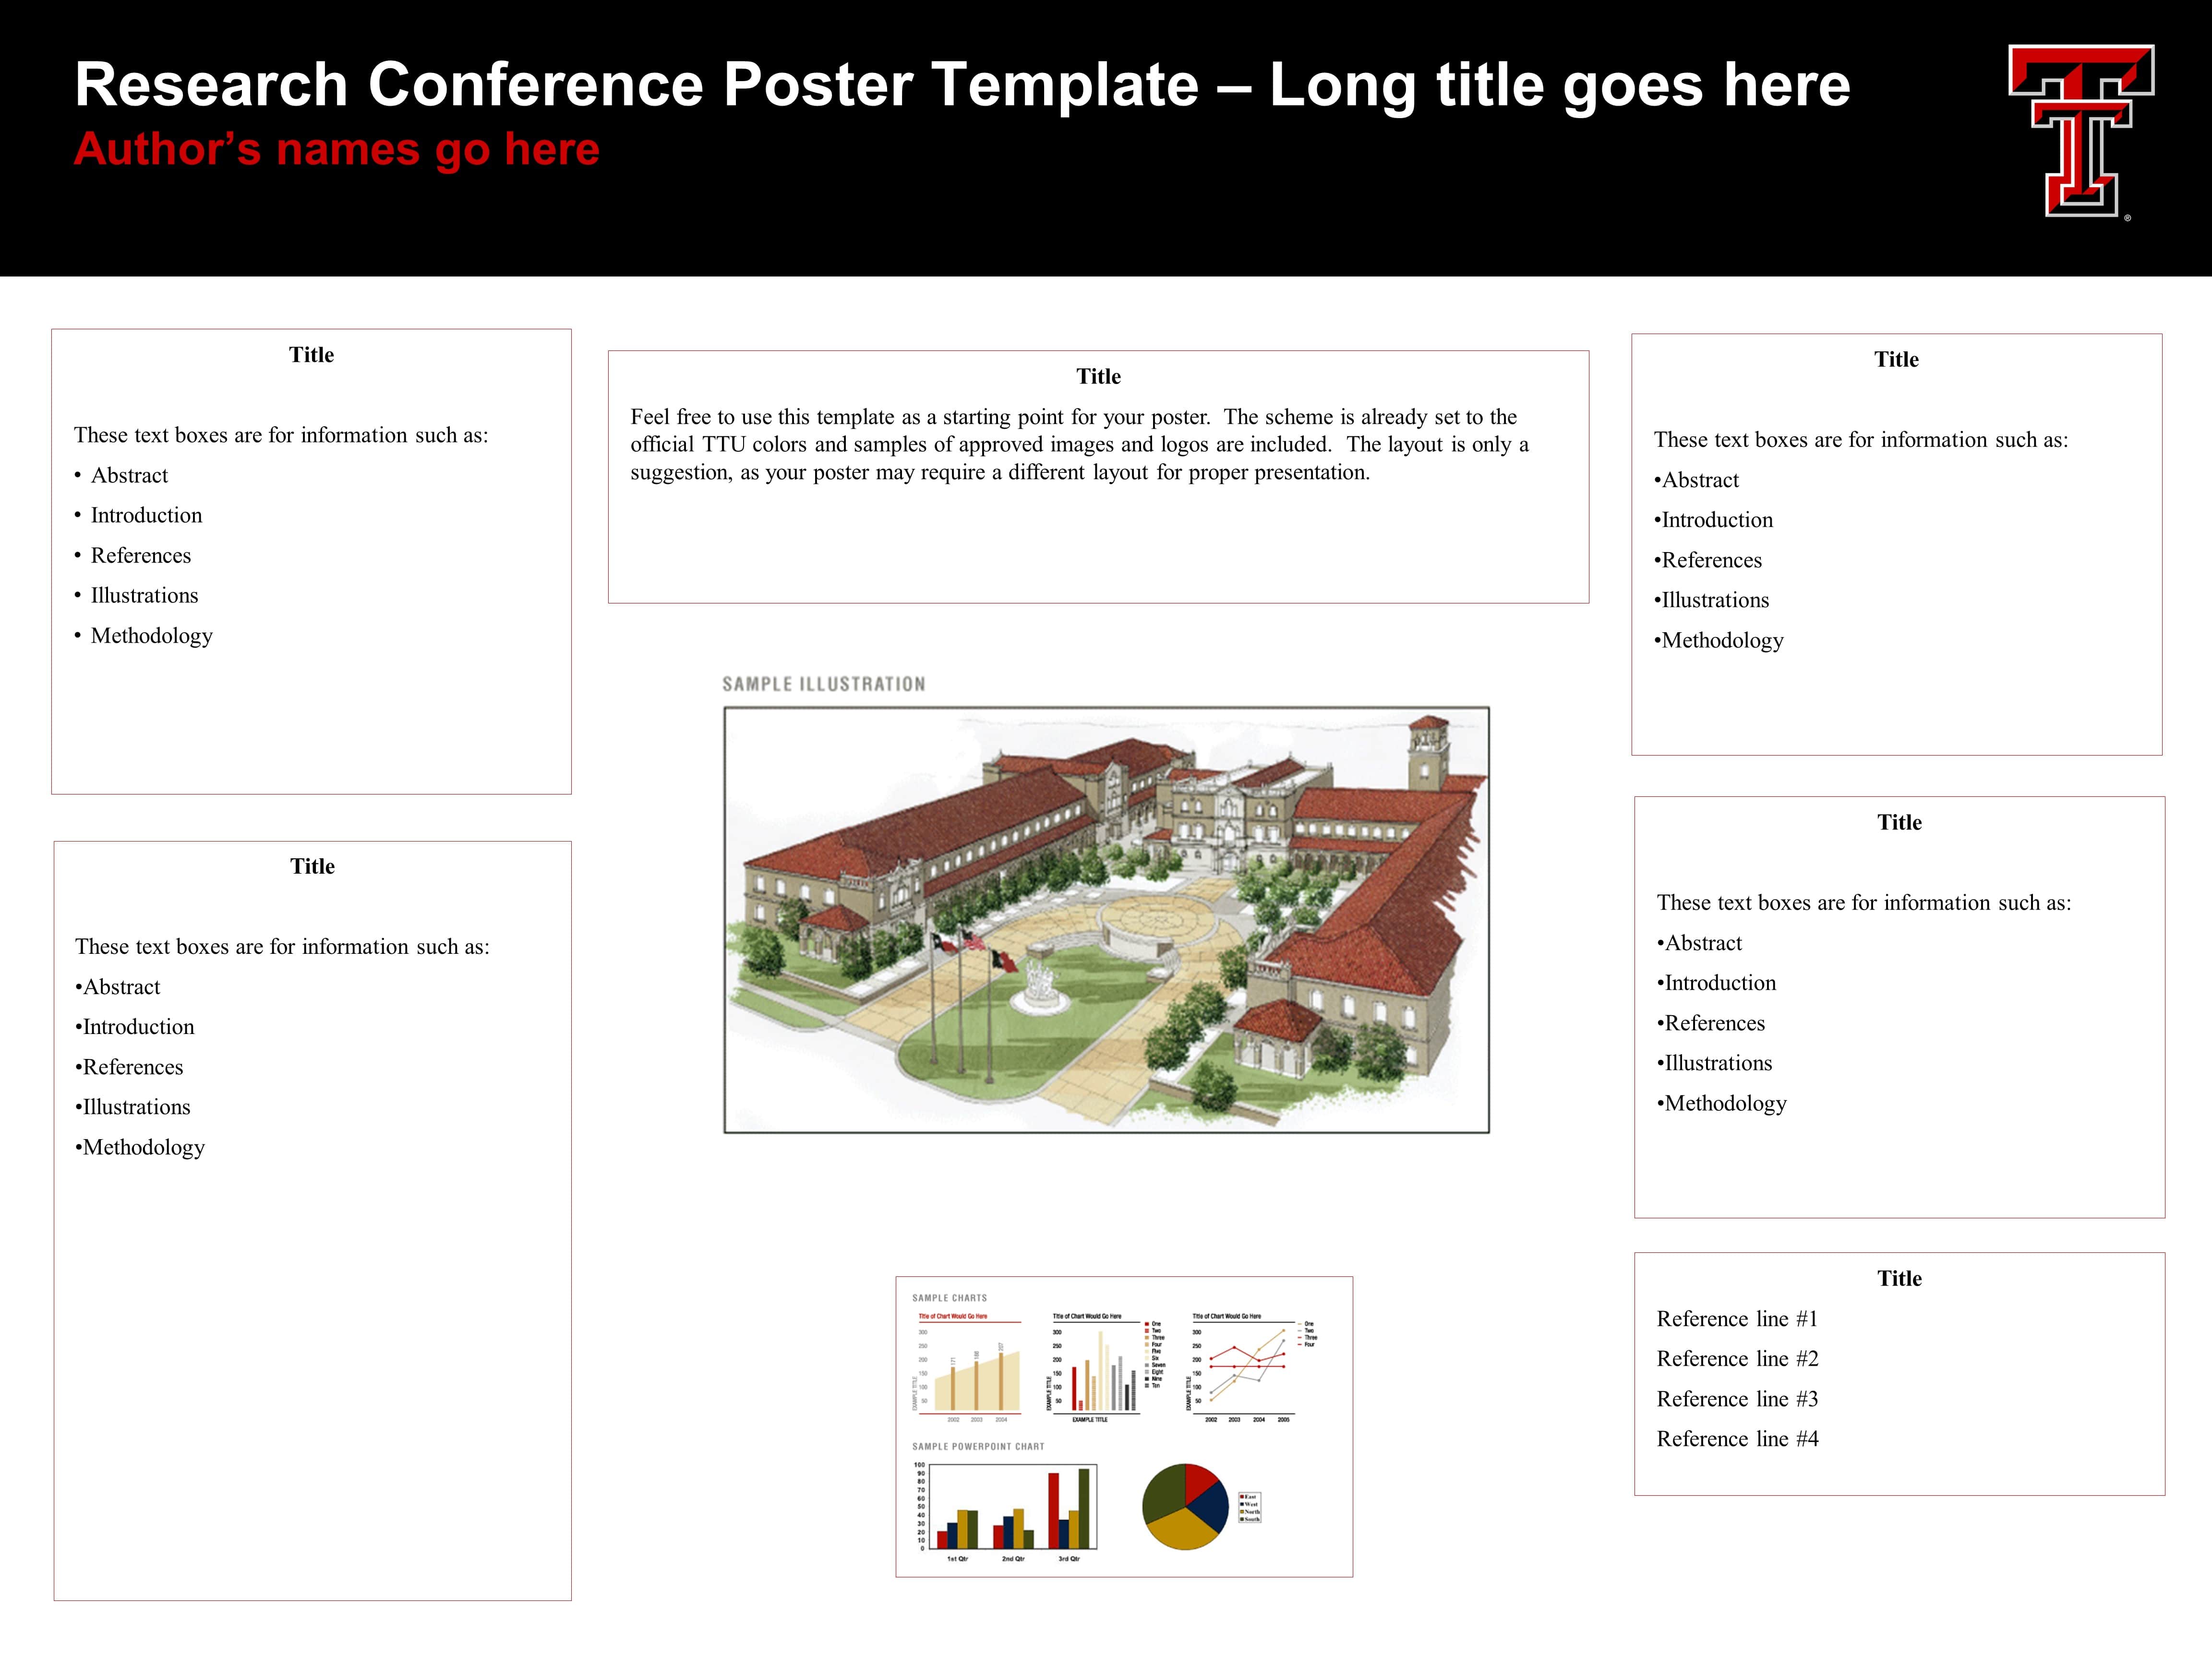 Research Poster 2-34X46